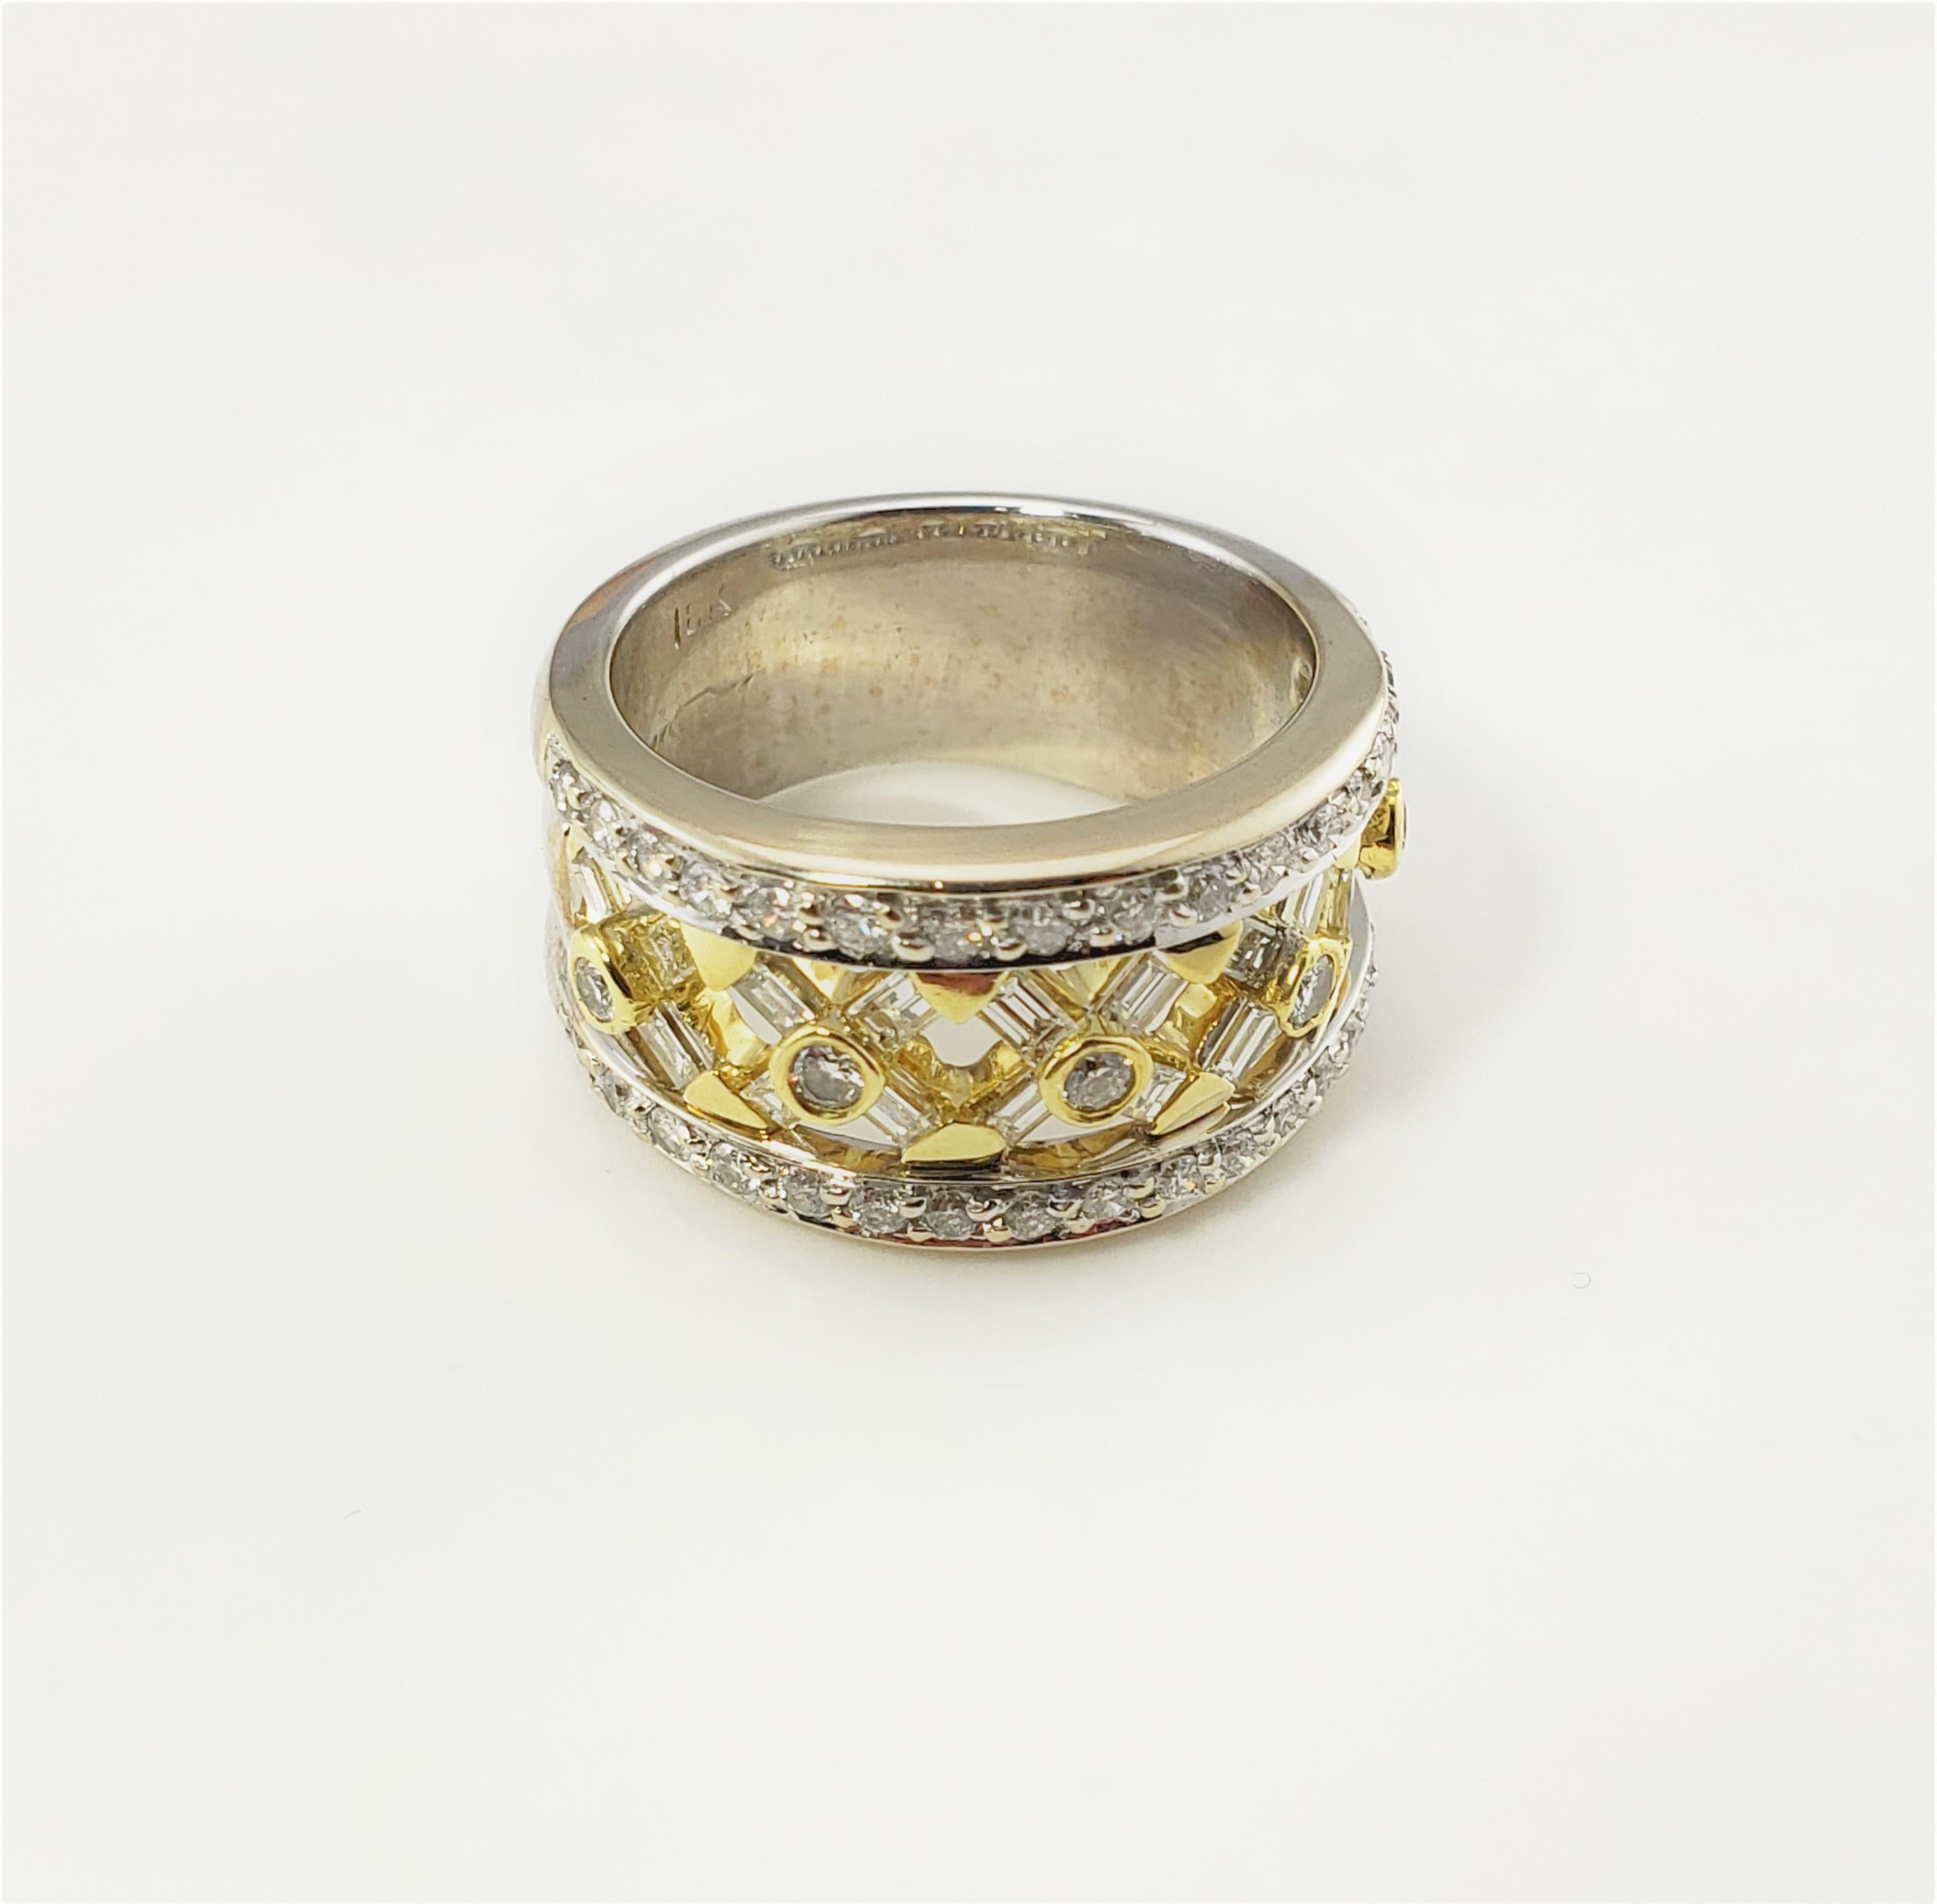 18 Karat White and Yellow Gold Diamond Band Ring Size 6.25 GAI Certified-

This sparkling ring features 39 round brilliant cut diamonds and 20 baguette diamonds set in beautifully detailed 18K white and yellow gold.  Width:  12 mm.  Shank:  8